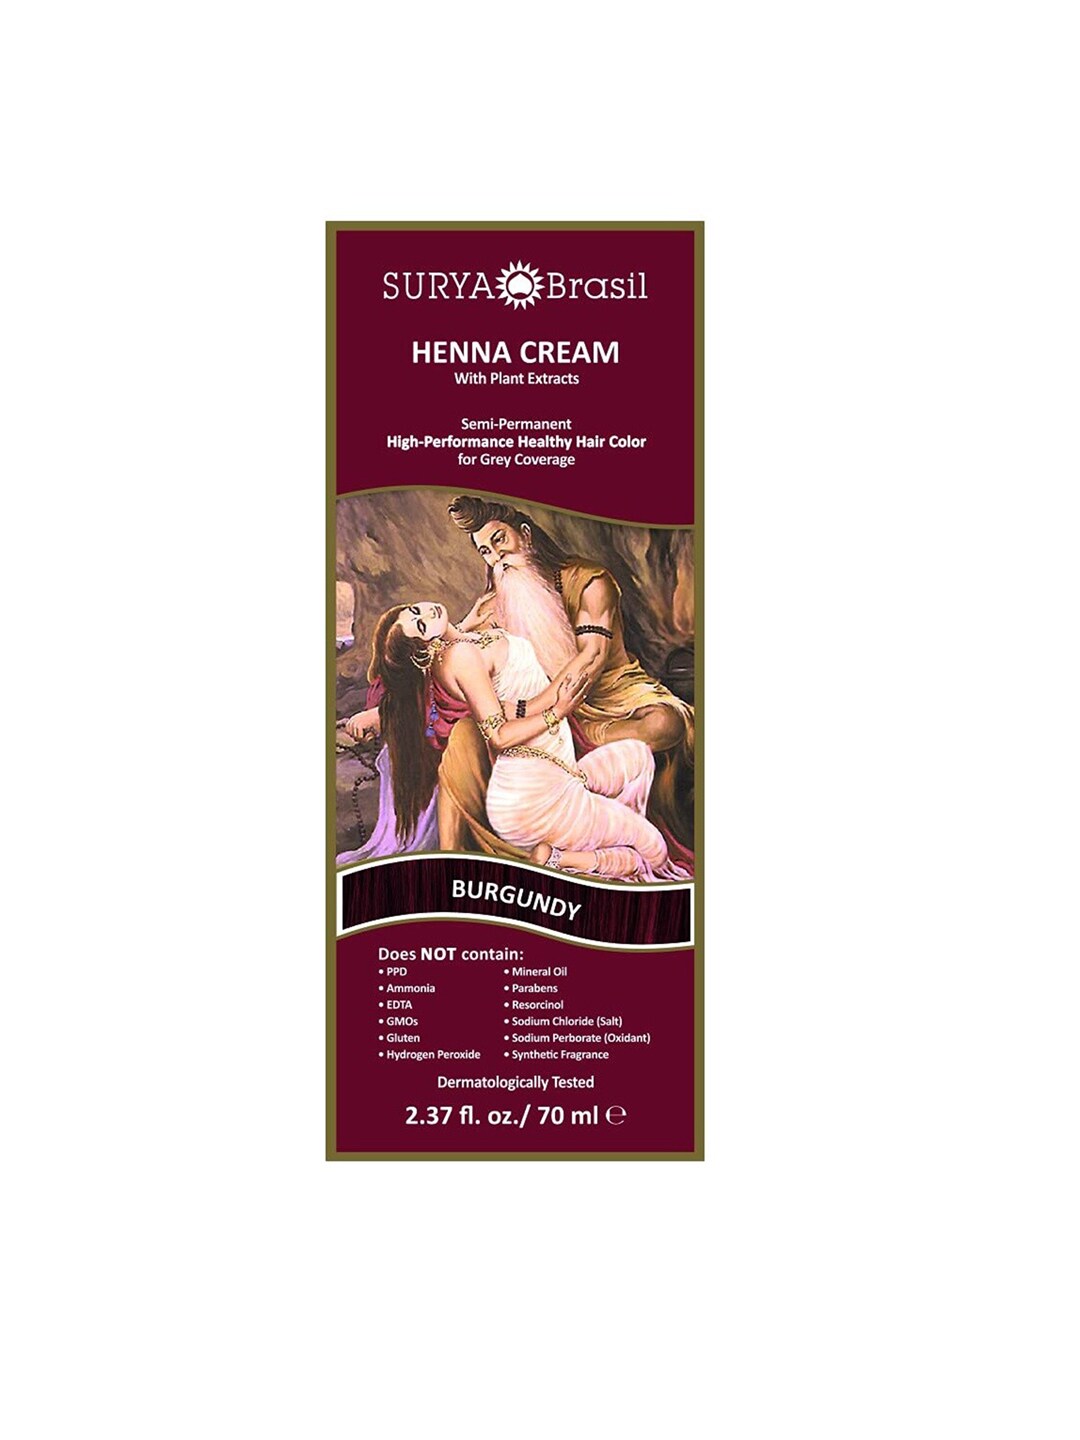 SURYA Brasil Henna Cream Semi-Permanent Hair Color with Plant Extracts 70ml - Burgundy Price in India